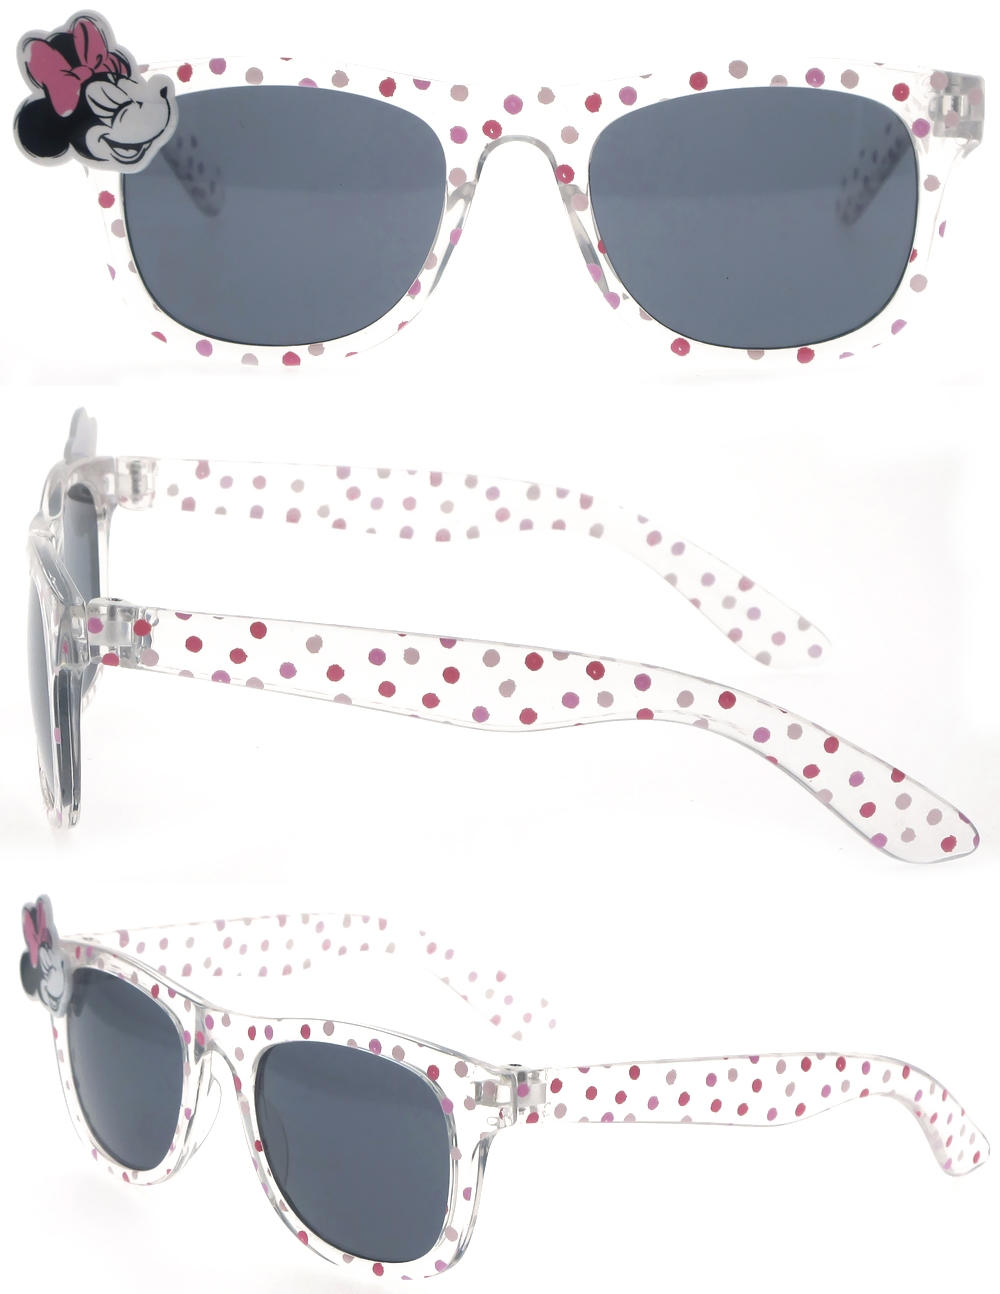 Dachuan Optical DSPK342012 China Manufacture Factory New Arrival Cute Children Sunglasses with Screw Hinge (1)